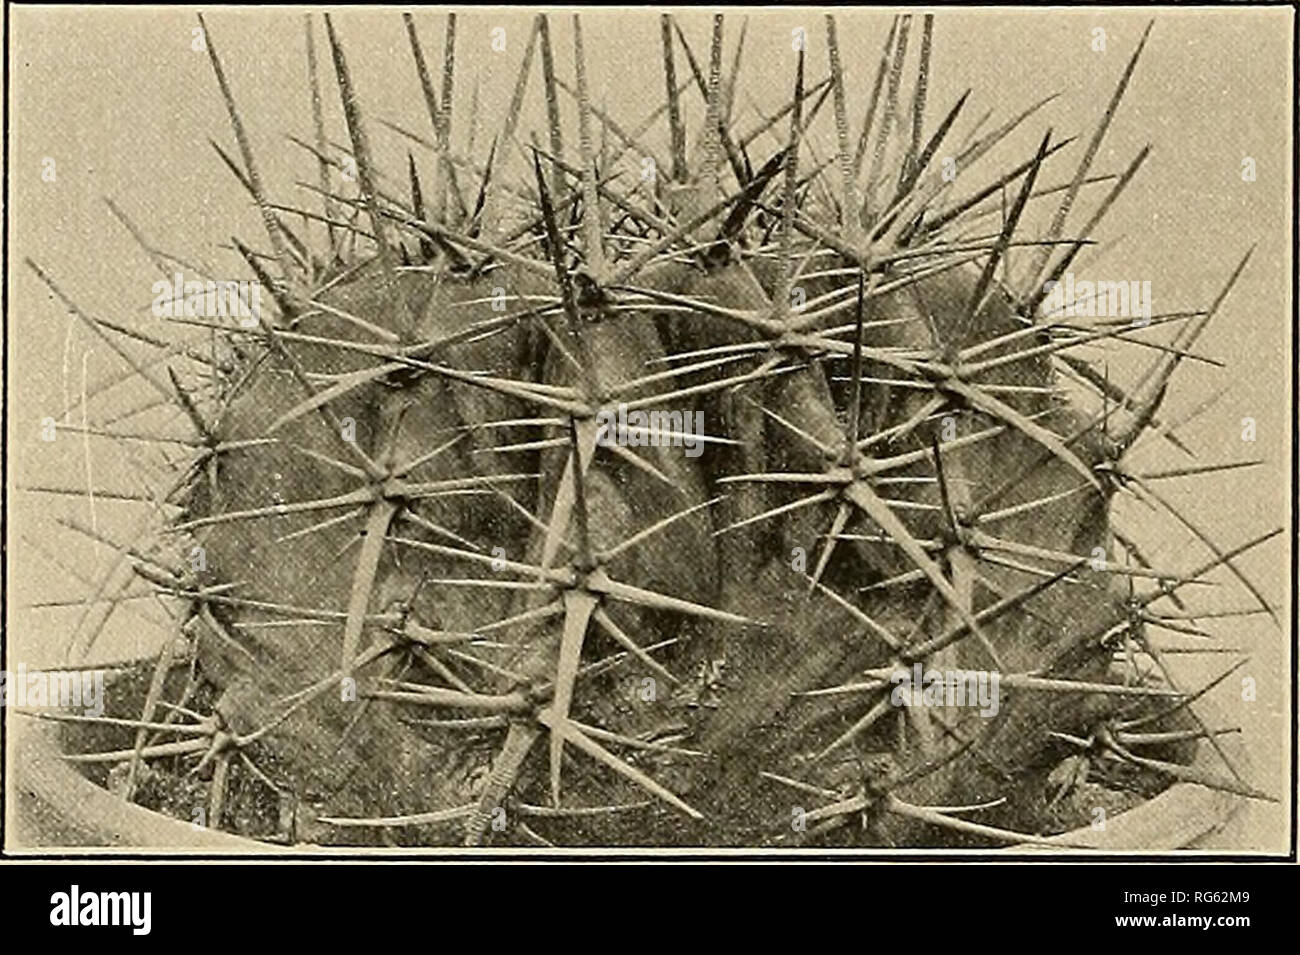 . The Cactaceae : descriptions and illustrations of plants of the cactus family. 172 the cactaceae;. Type locality: Mexico. Distribution: Eastern Mexico. Unfortunately, the type of the genus Echinocactus is now known only from the early descriptions and a single illustration. It seems to be quite distinct from the other species of the genus. The large giant cacti are very common in eastern Mexico, but it will require some very careful field work to disentangle the species. Illustration: Link and Otto, Verh. Ver. Beford. Gartenb. 3: pi. 14, as Melocactus platyacantkus.. Fig. 1S8.—Echinocactus p Stock Photo